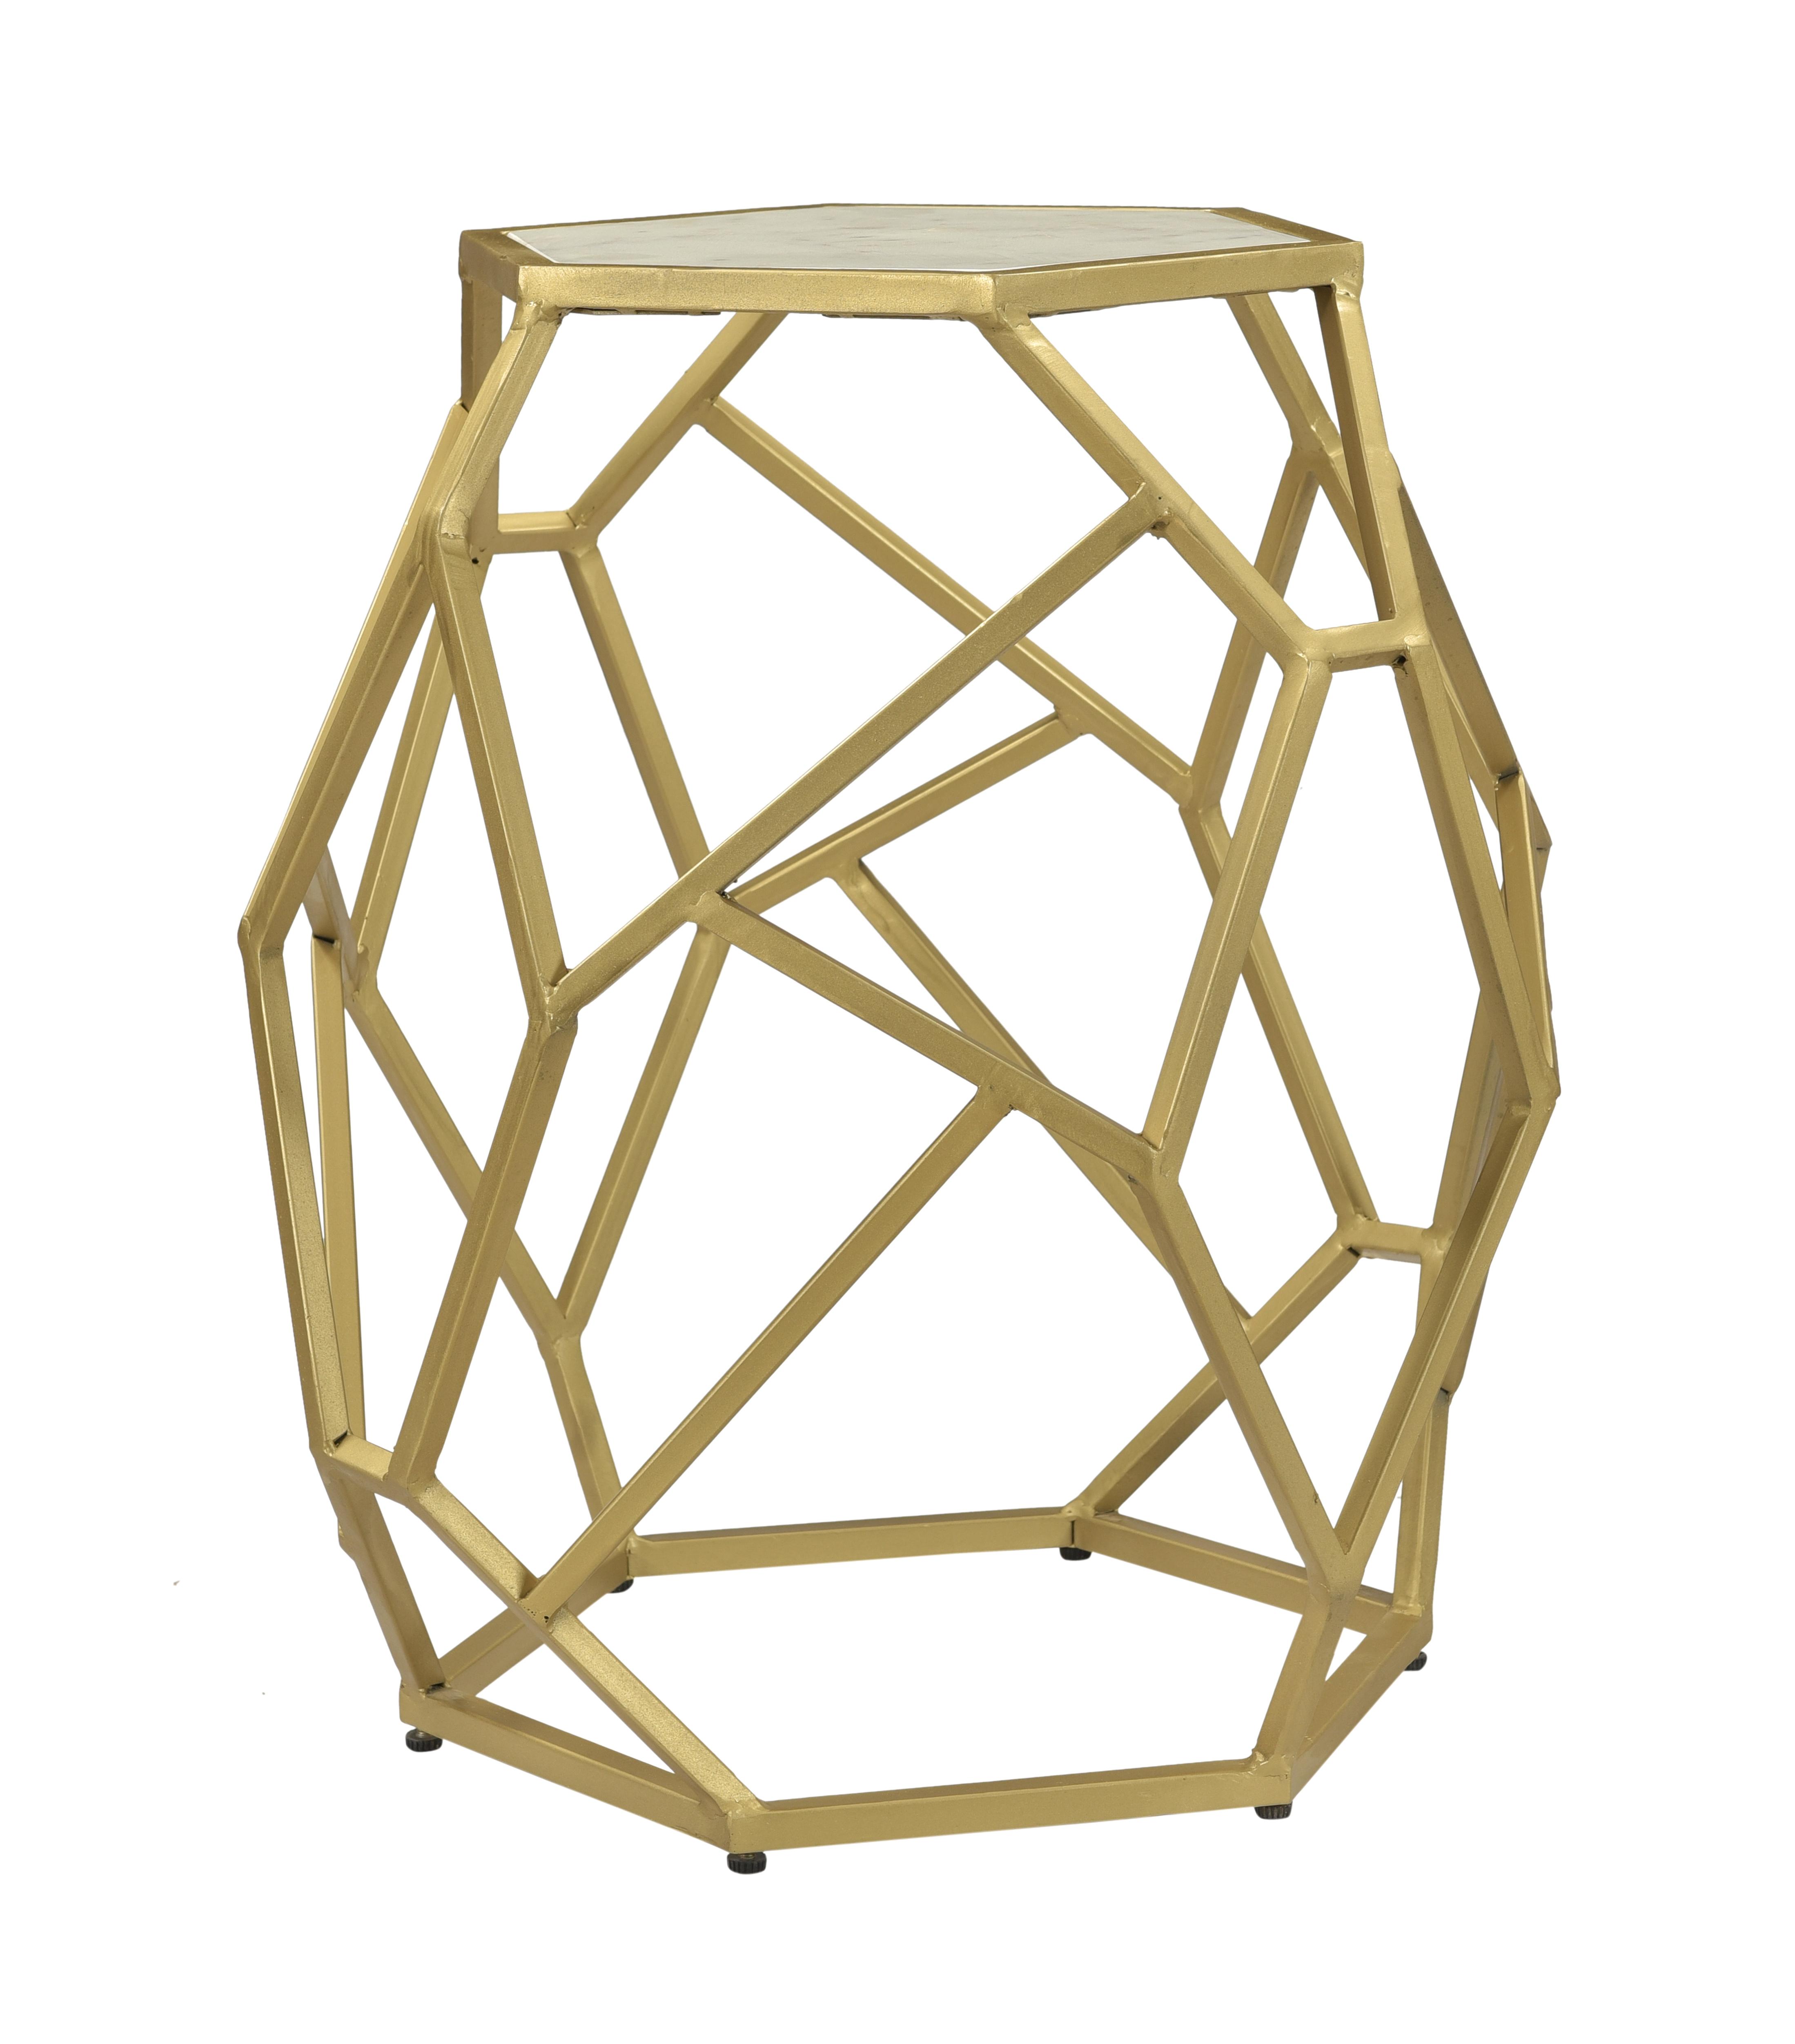 Hexagonal Accent Table - White Marble & Gold Powder Coat - Image 2